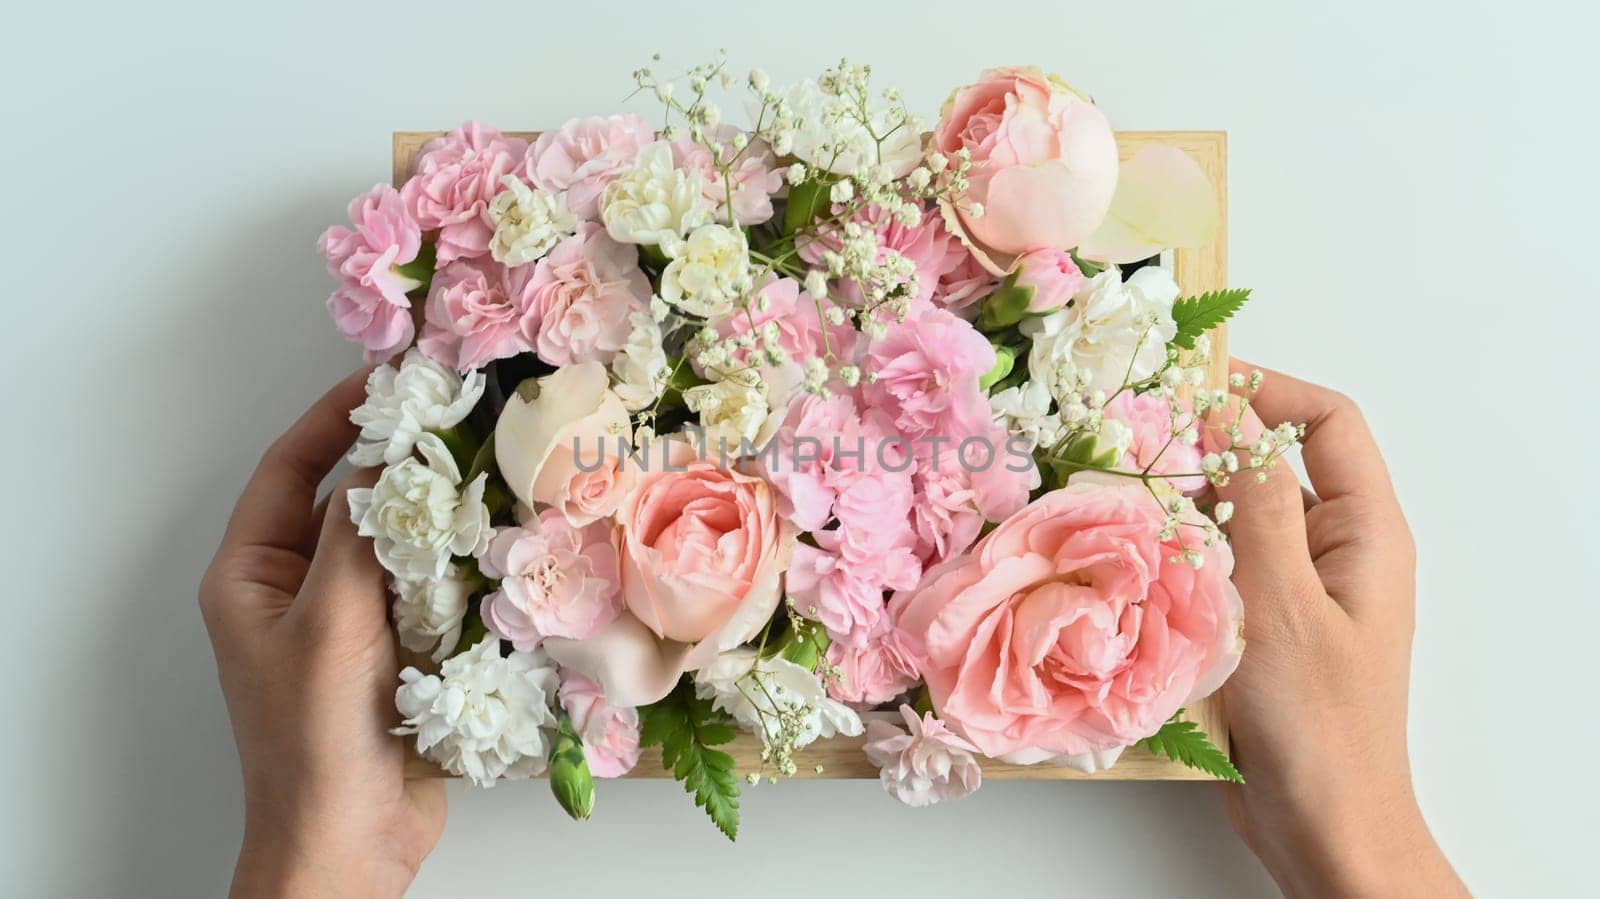 Hands holding wooden crate full of pastel colors flowers with pink rose and carnation on white background by prathanchorruangsak